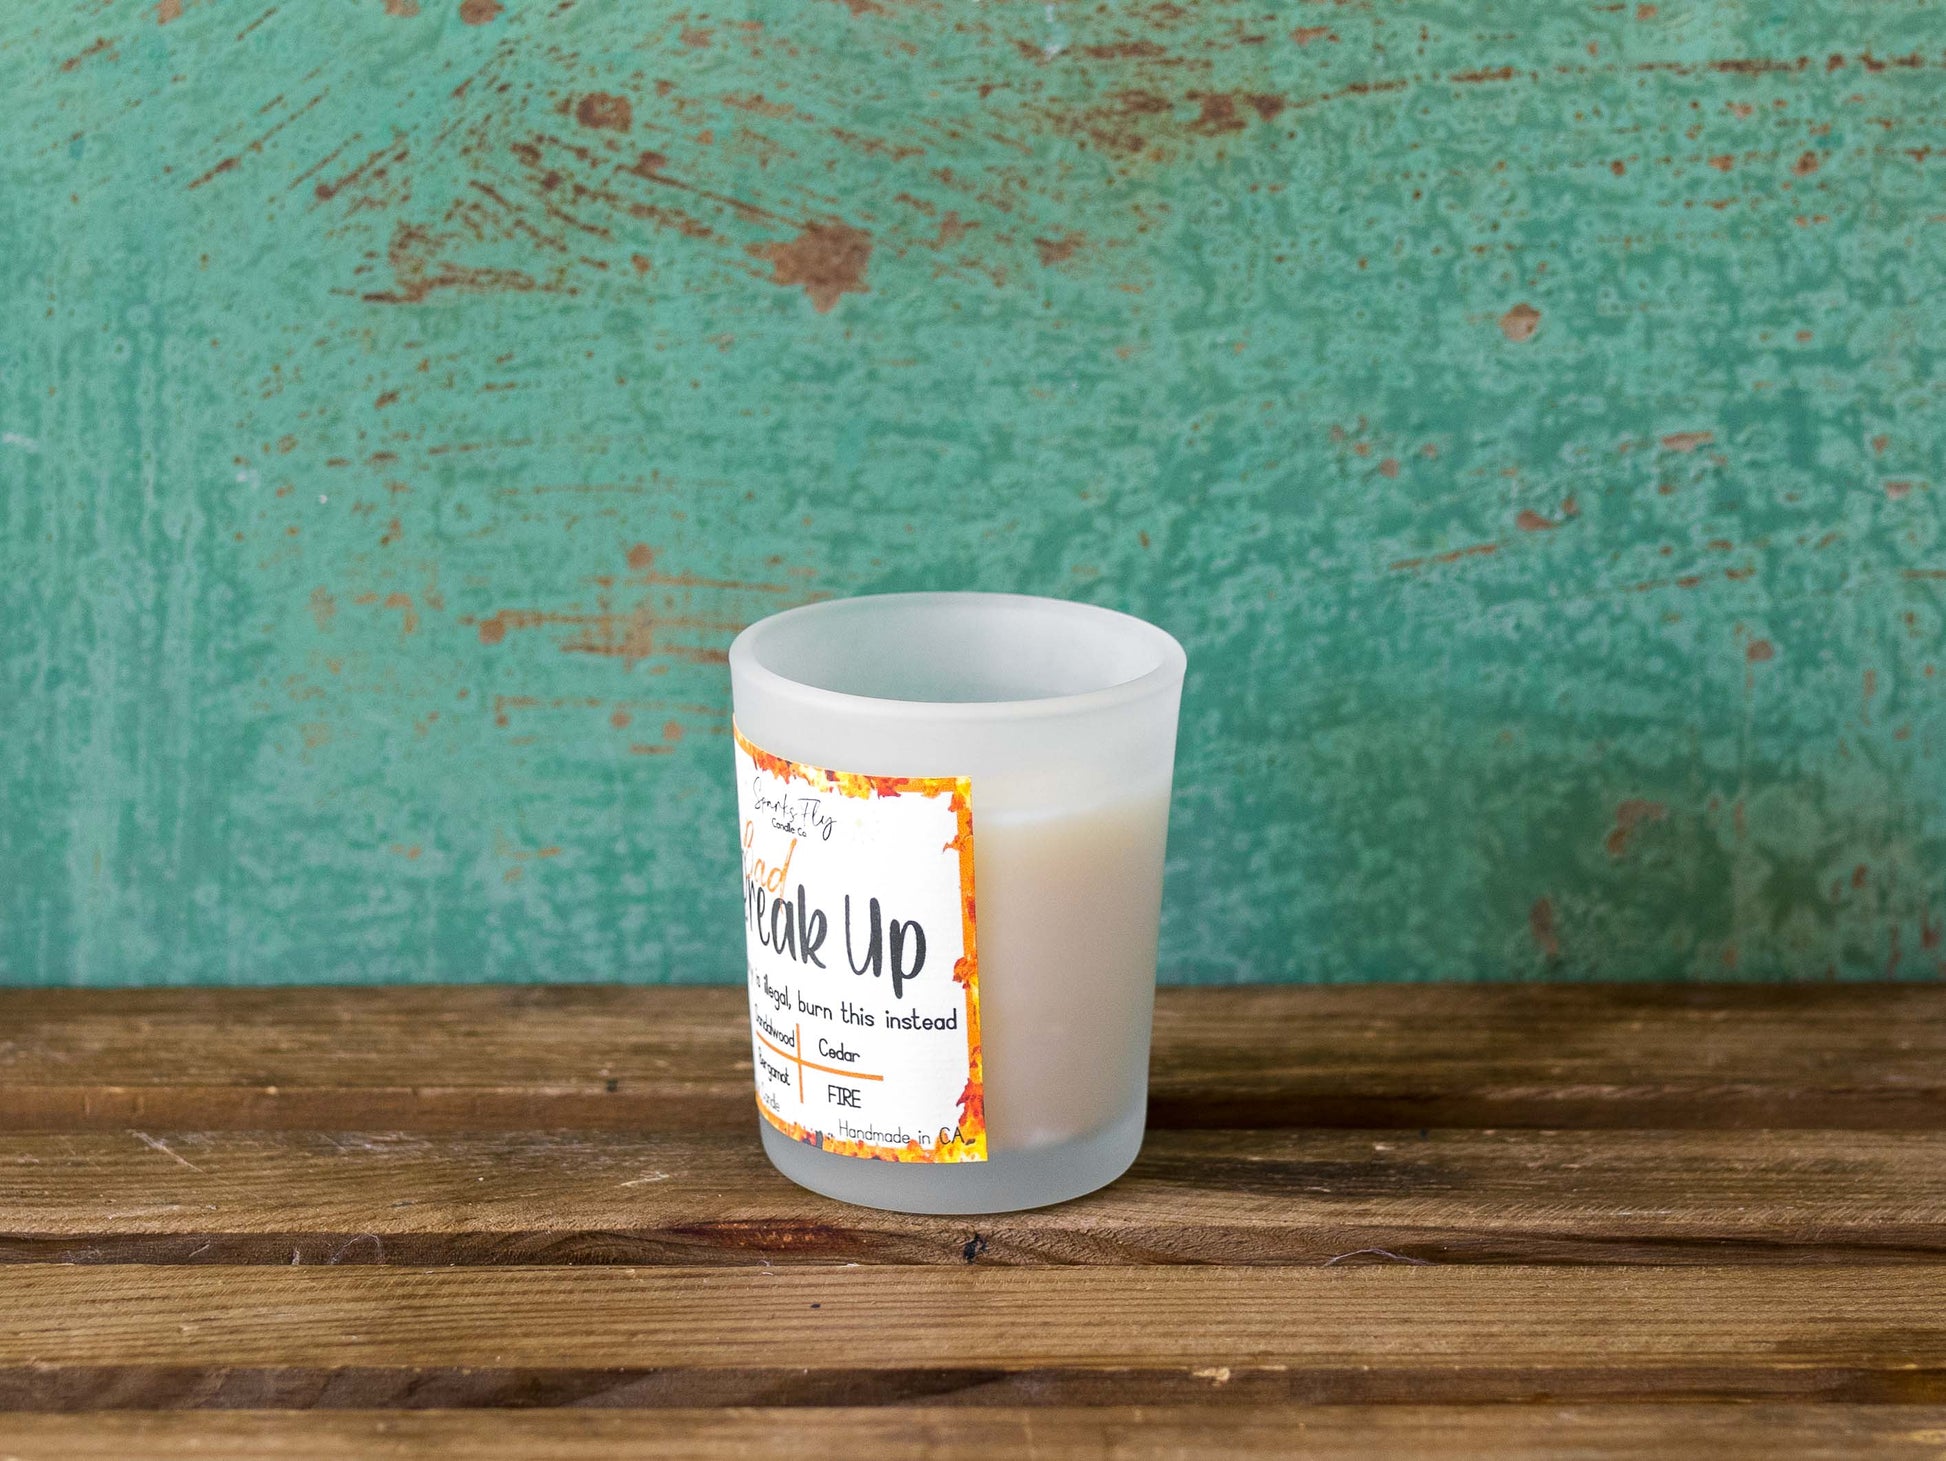 Bad Breakup sassy candle; promoting legal relief from heartbreak with a fiery scent twist, satire